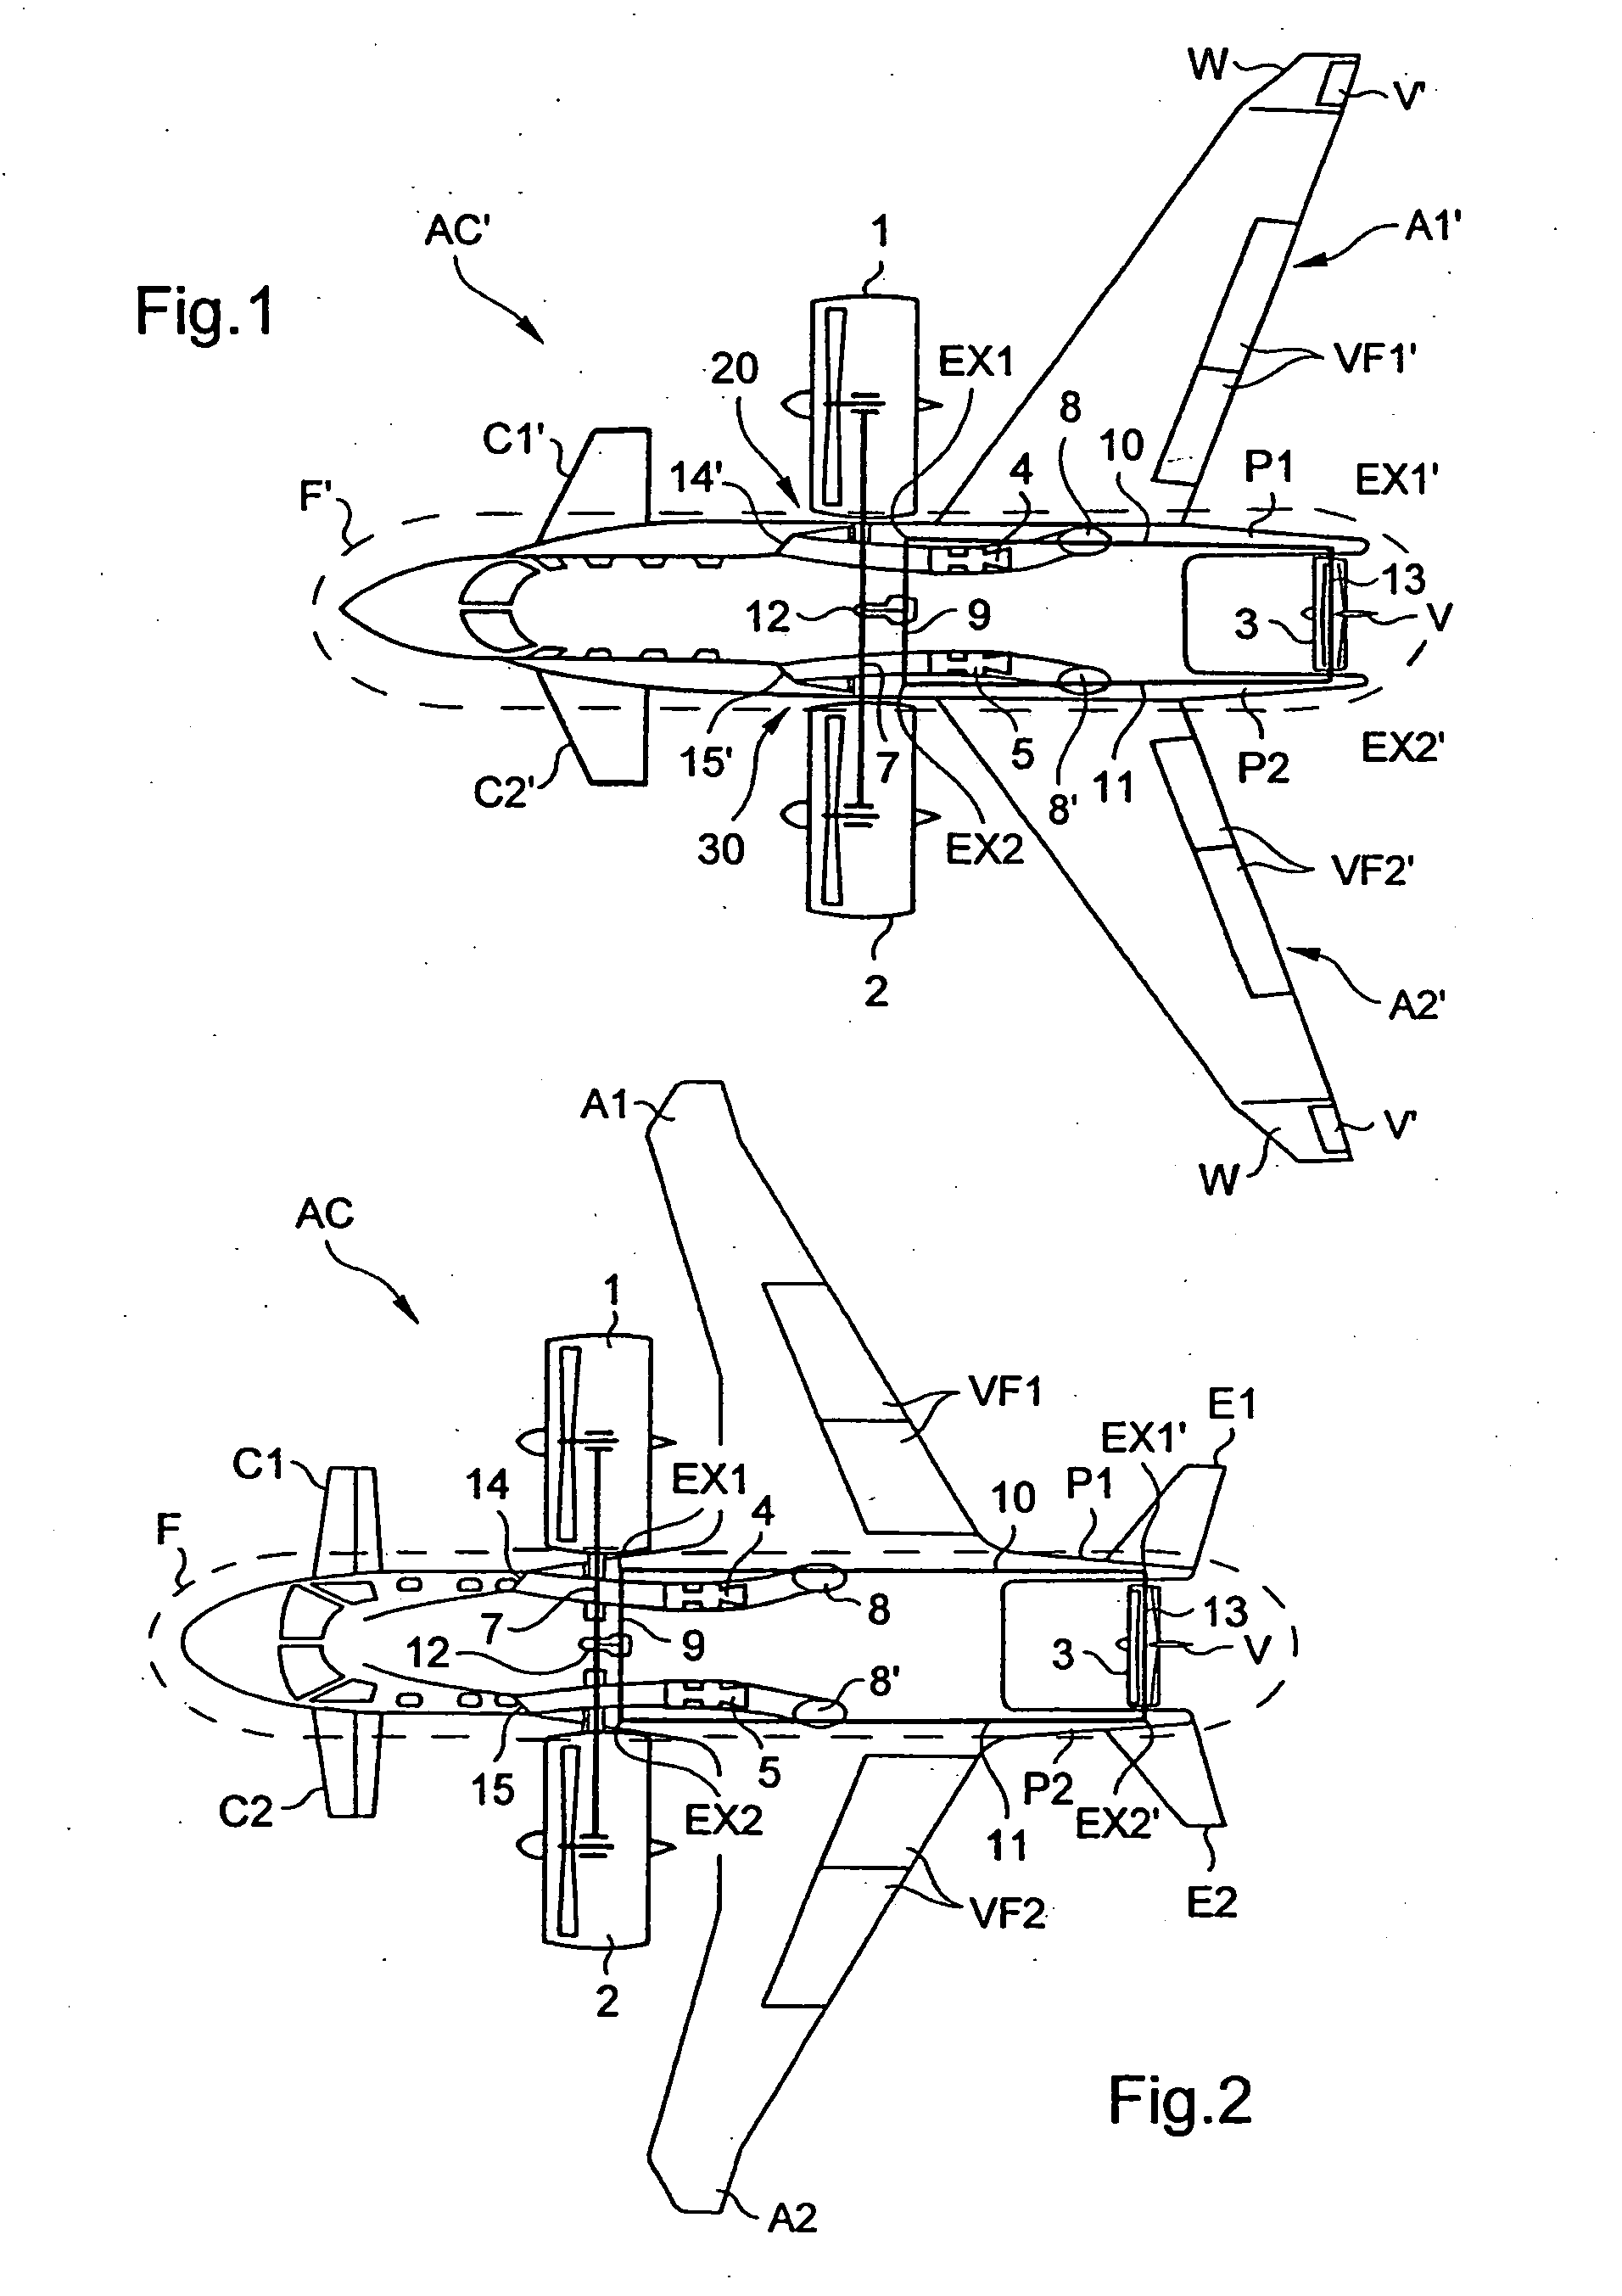 Convertible aircraft provided with two tilt fans on either side of the fuselage and with a third tilt fan arranged on the tail of the aircraft